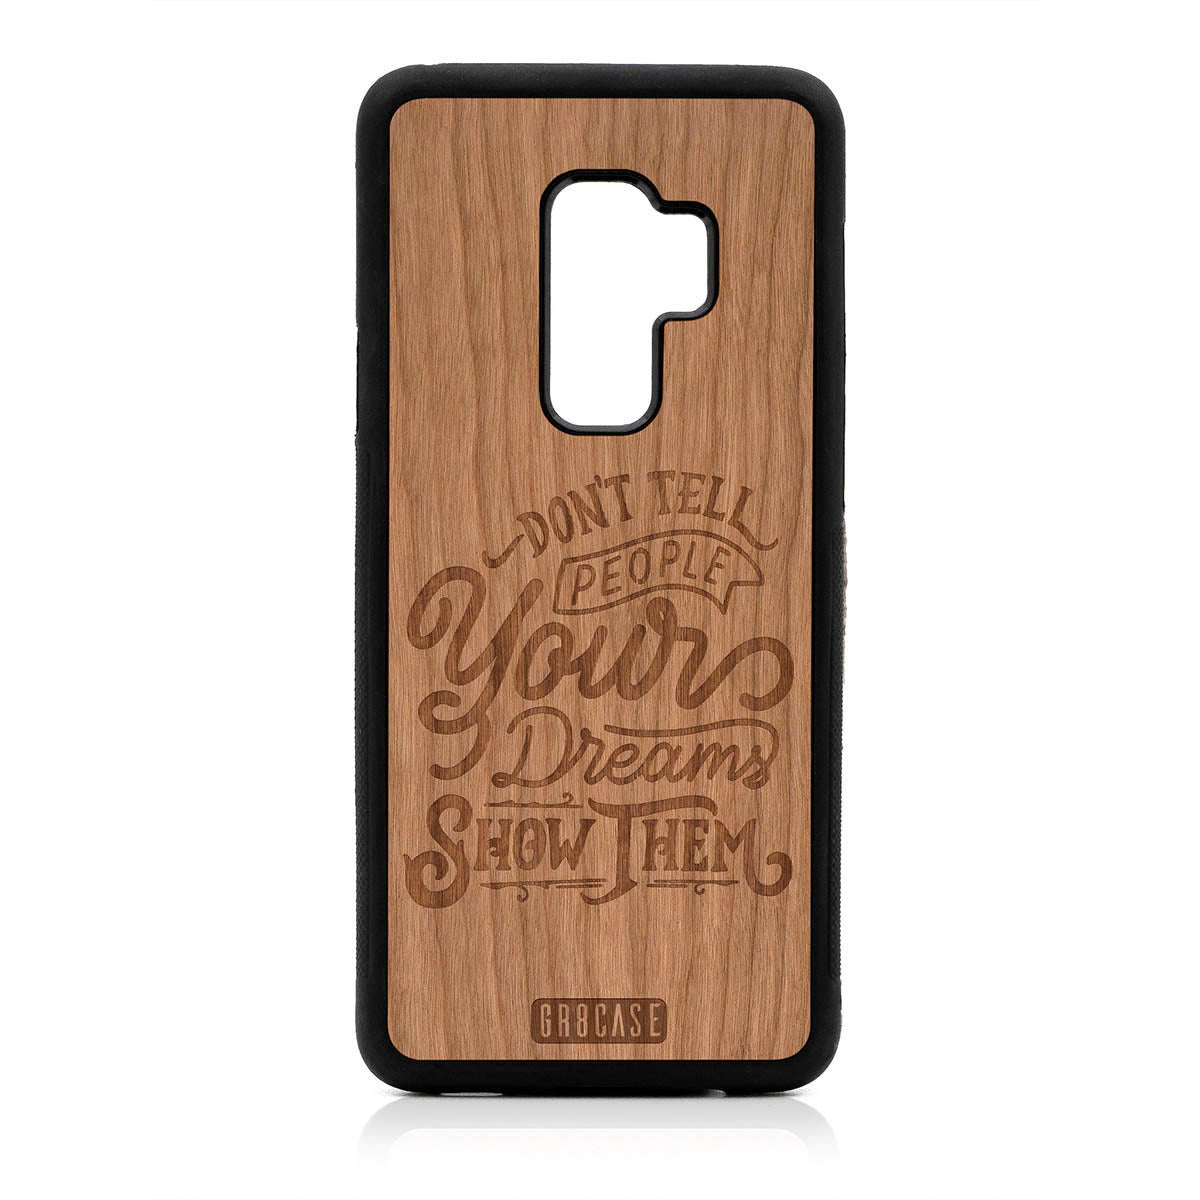 Don't Tell People Your Dreams Show Them Design Wood Case For Samsung Galaxy S9 Plus by GR8CASE